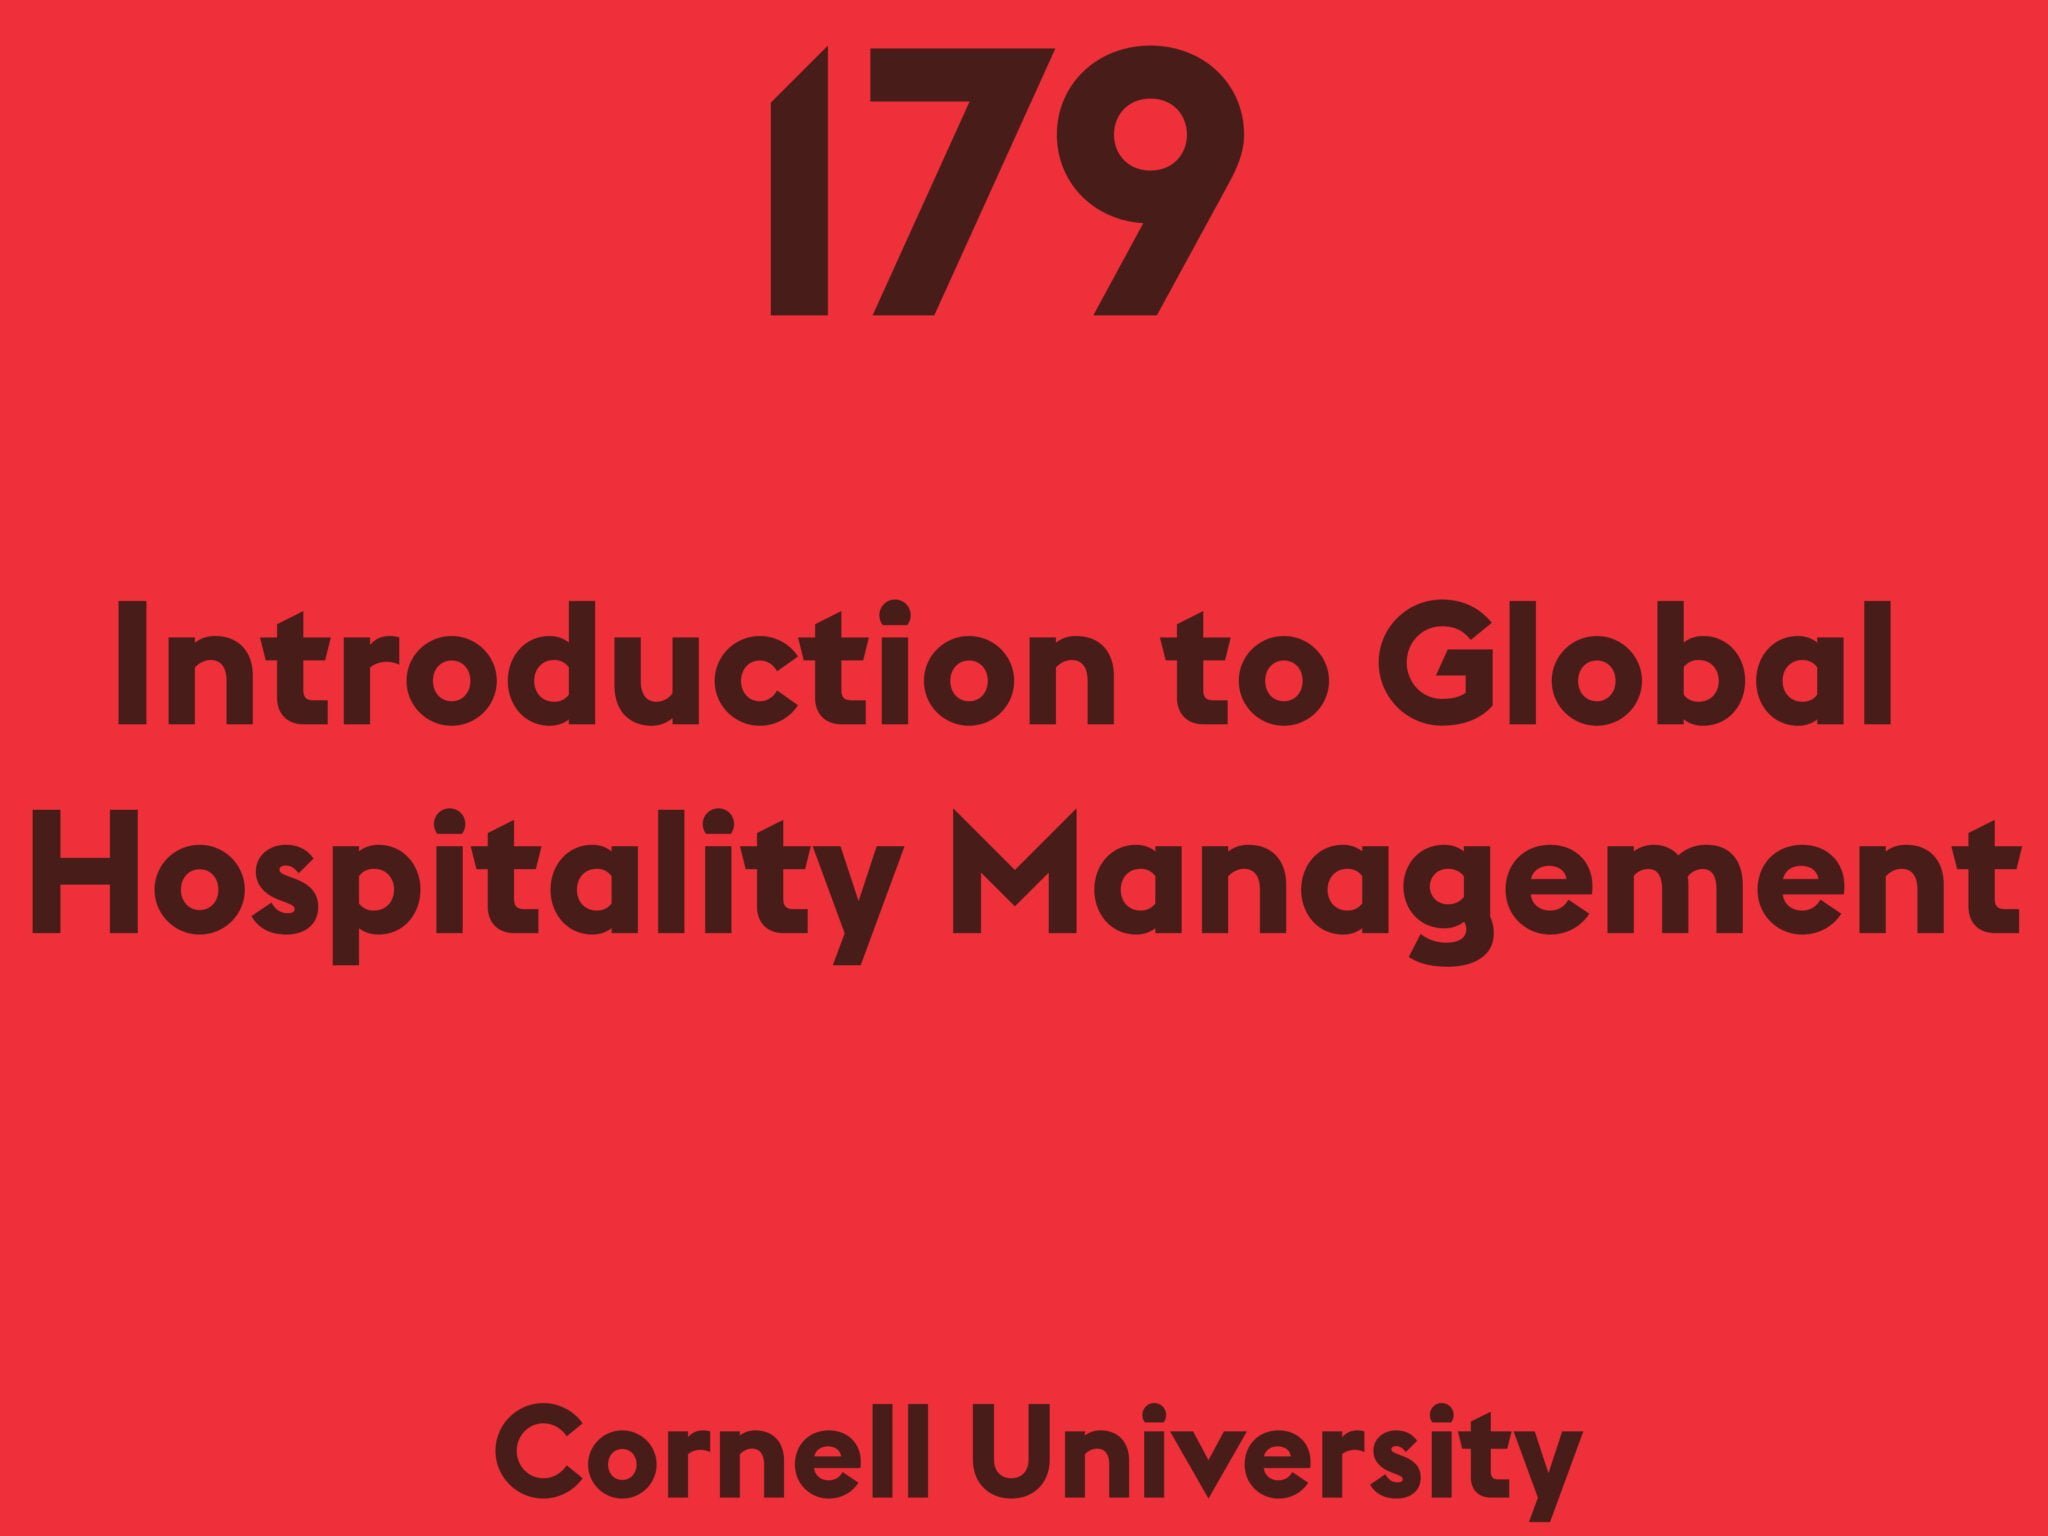 Introduction to Global Hospitality Management